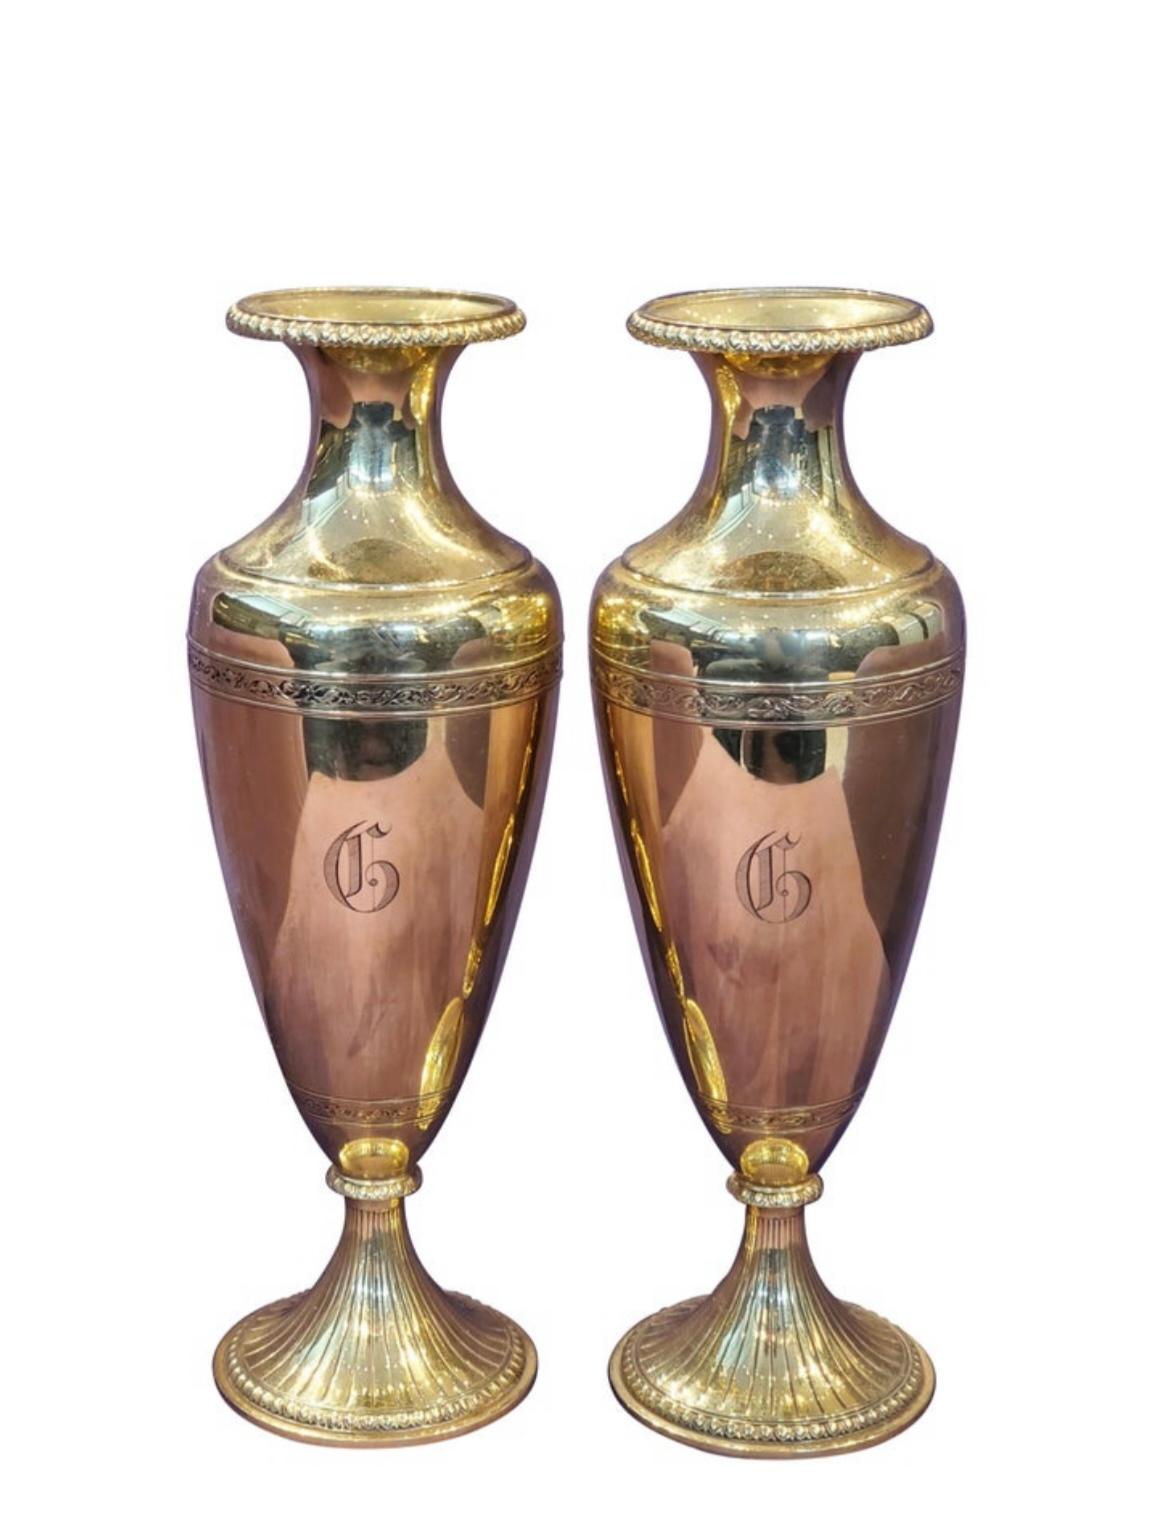 Pair of 14 karat gold flower vases

Dimensions: 
approximately 7.82 x 2.75

Weight: 464.1 grams.
